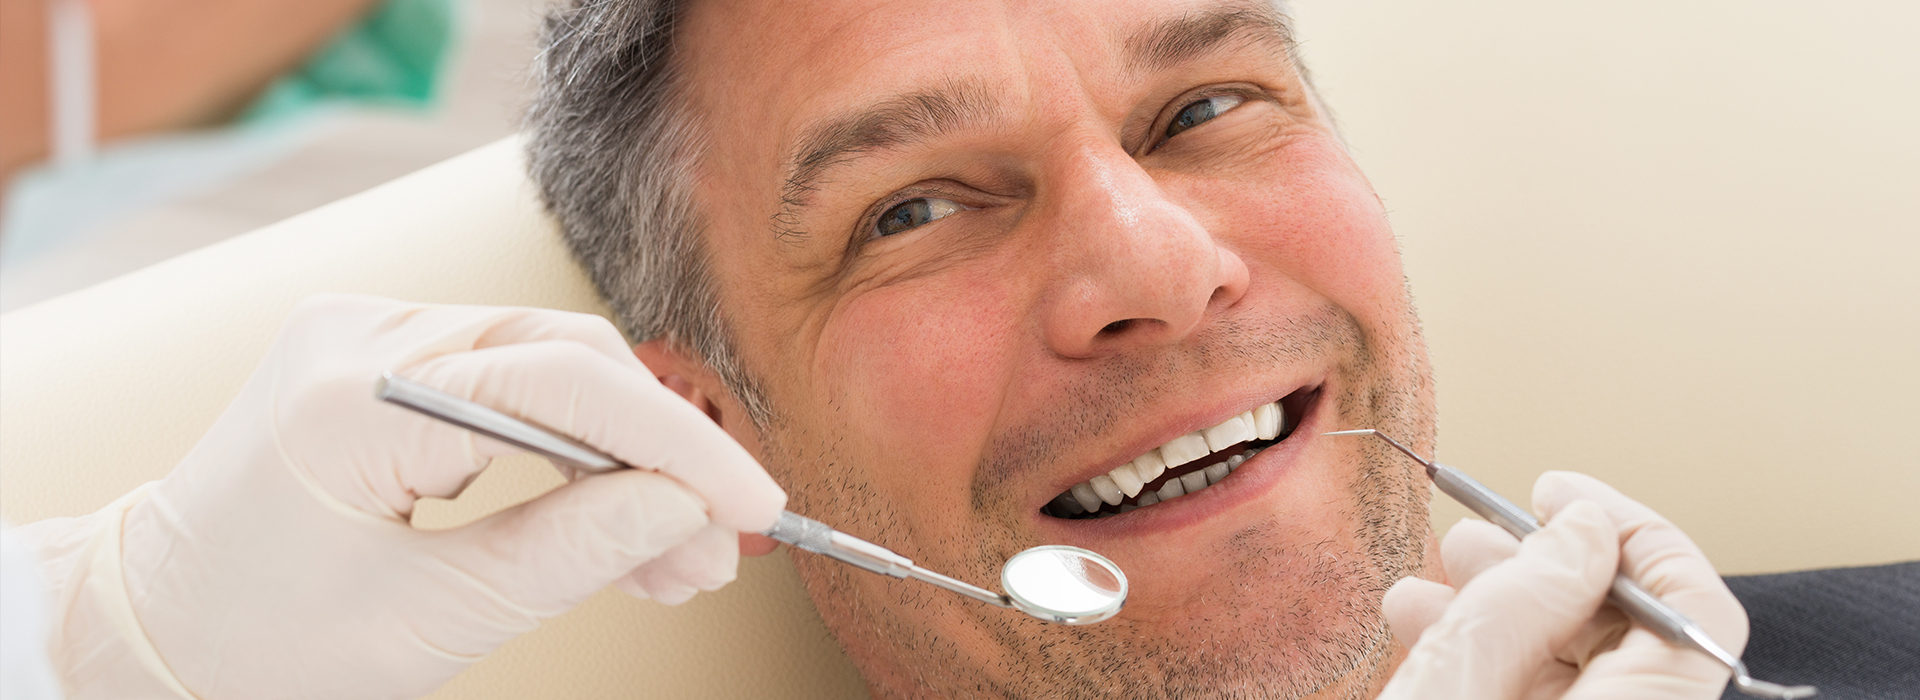 Remmers Dental | Periodontal Treatment, Night Guards and Pediatric Dentistry